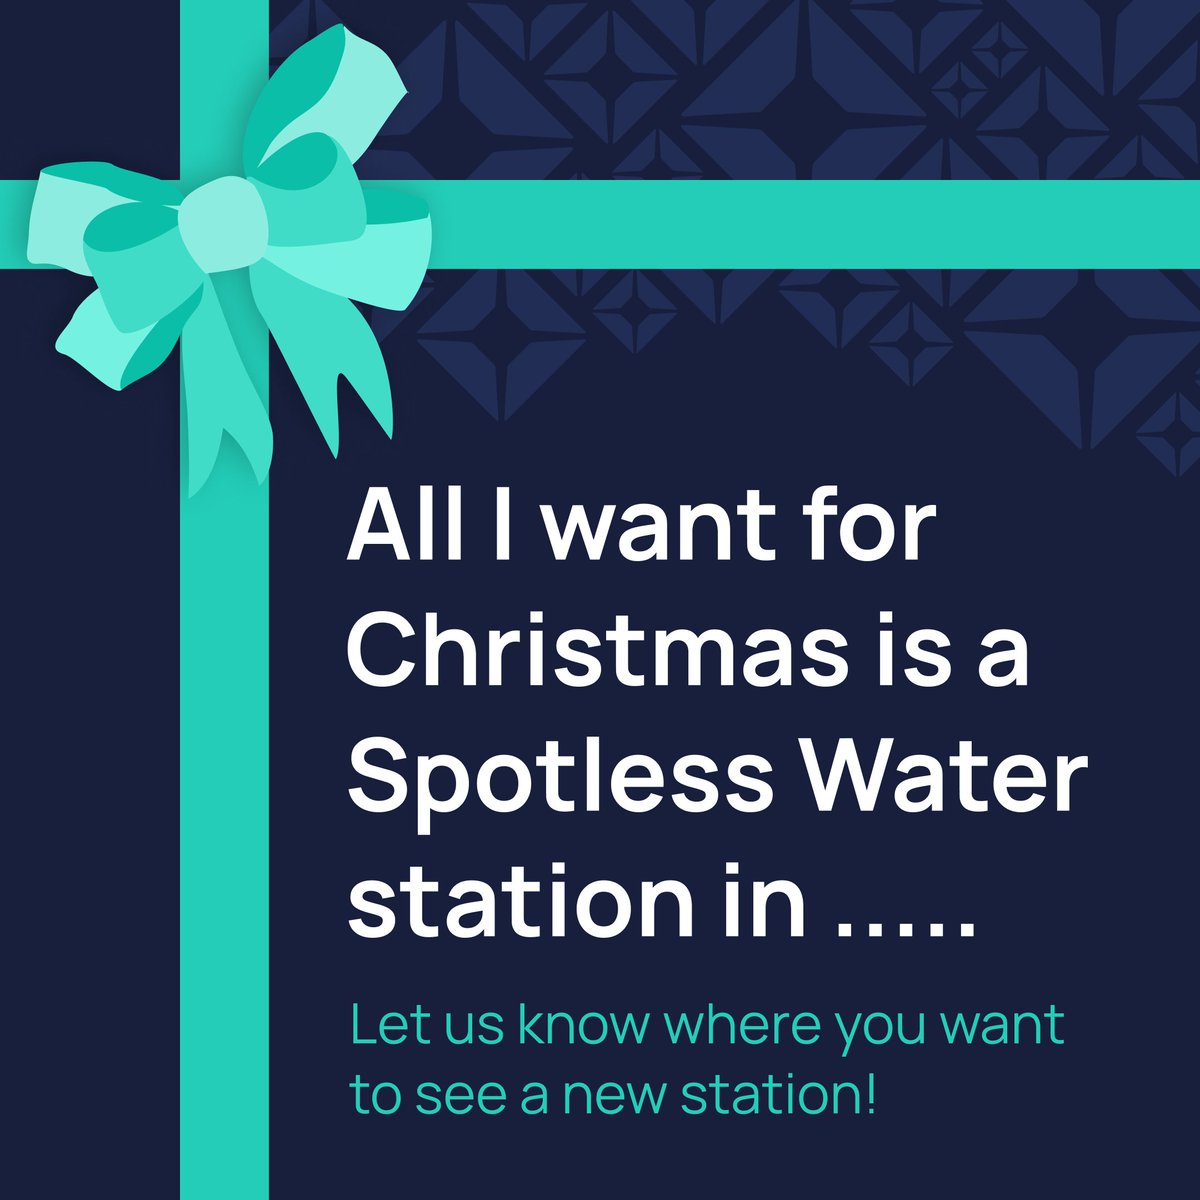 Dreaming of a Spotless holiday season! 🌟 Where do you wish for the next Spotless station to be? Let us know in the comments! #spotlesswater #purewater #windowcleaning #cardetailing #carvaleting #solarpanel #aquarium #cleaning